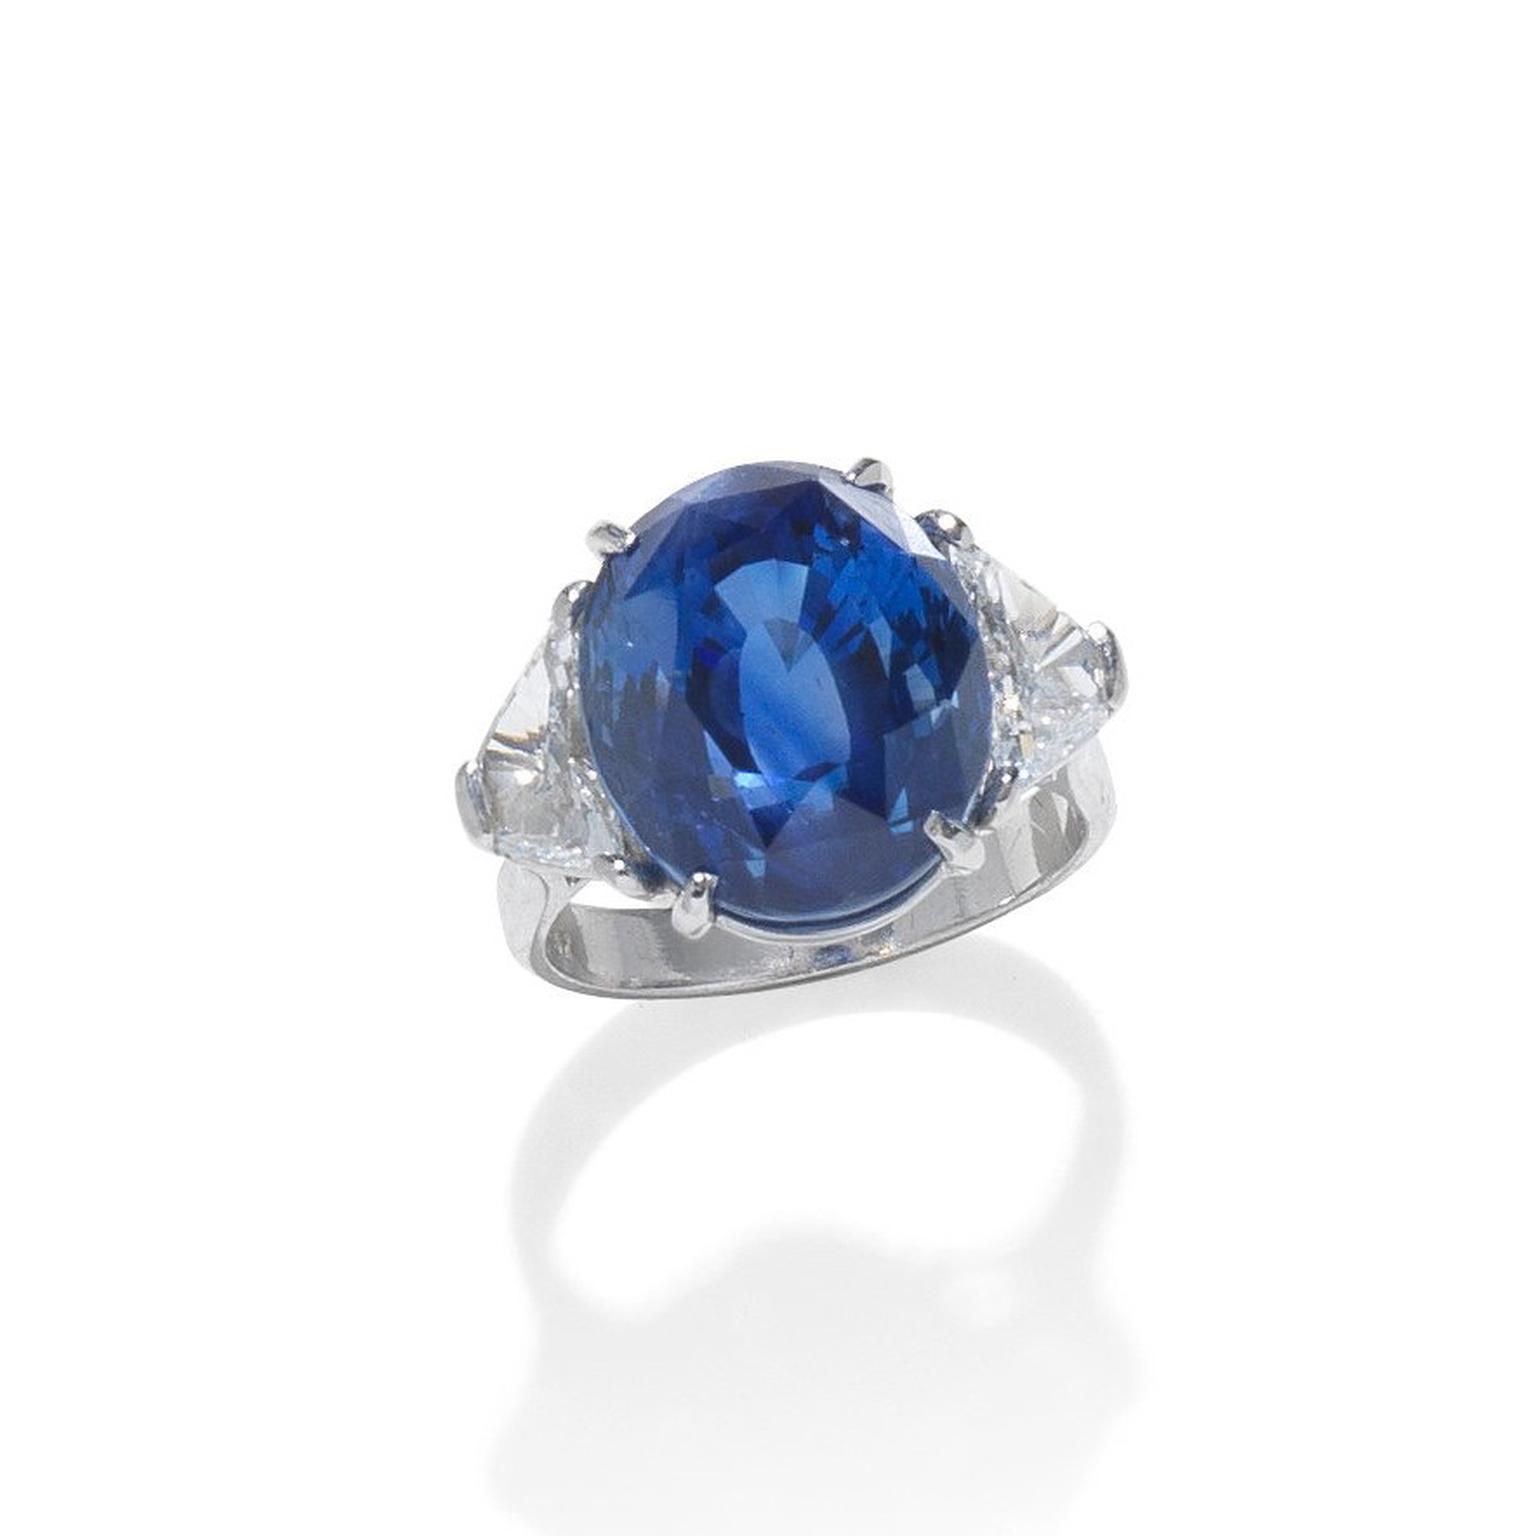 Sapphire and diamond ring auctionned by Bonhams - Lot 108